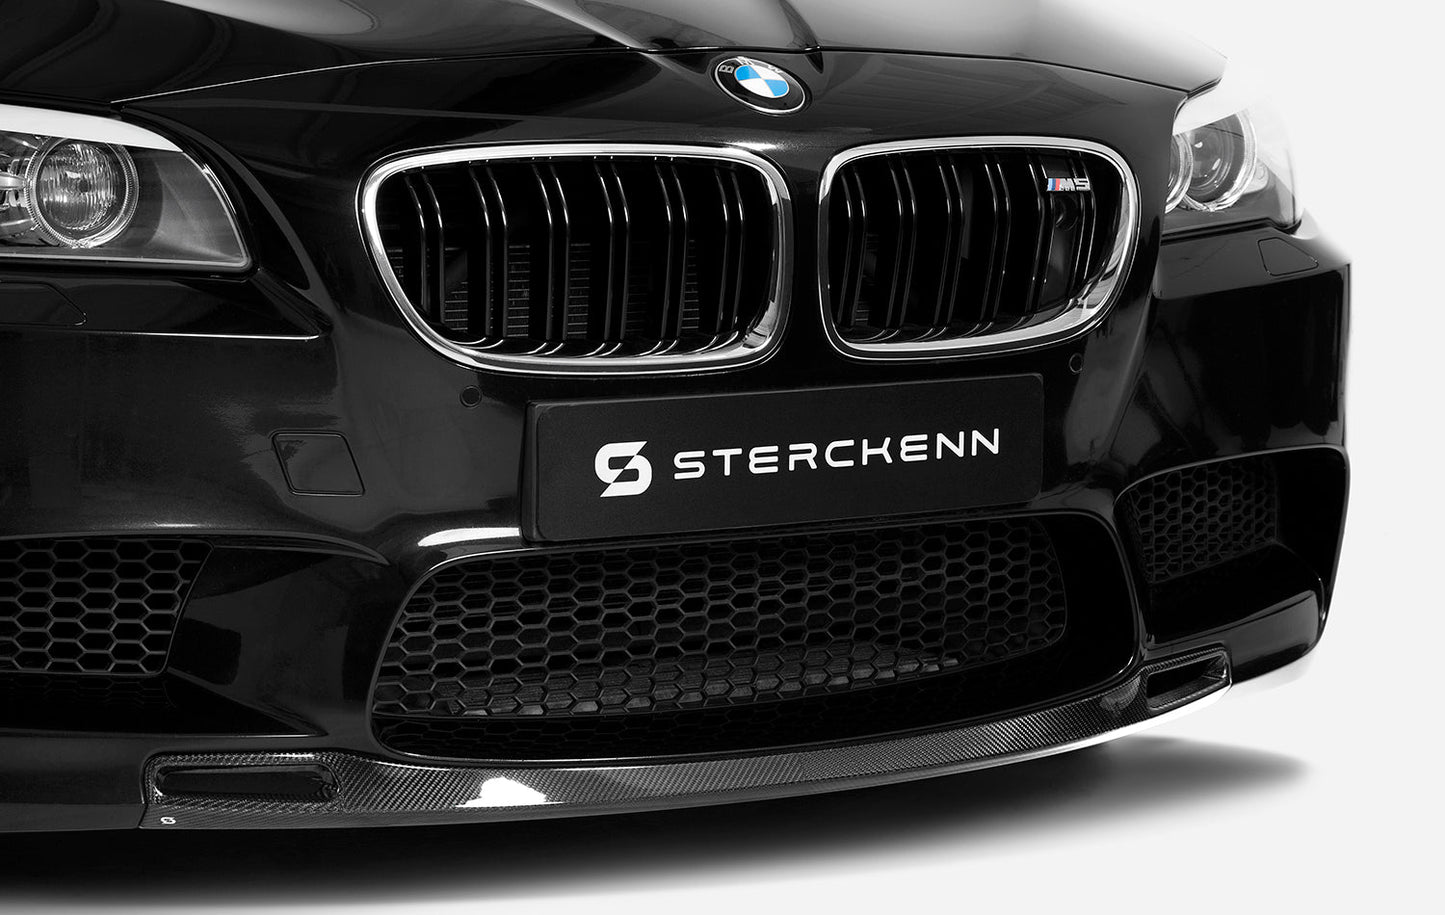 Front bumper with splitter of black BMW M5 (F10) with Sterckenn logo